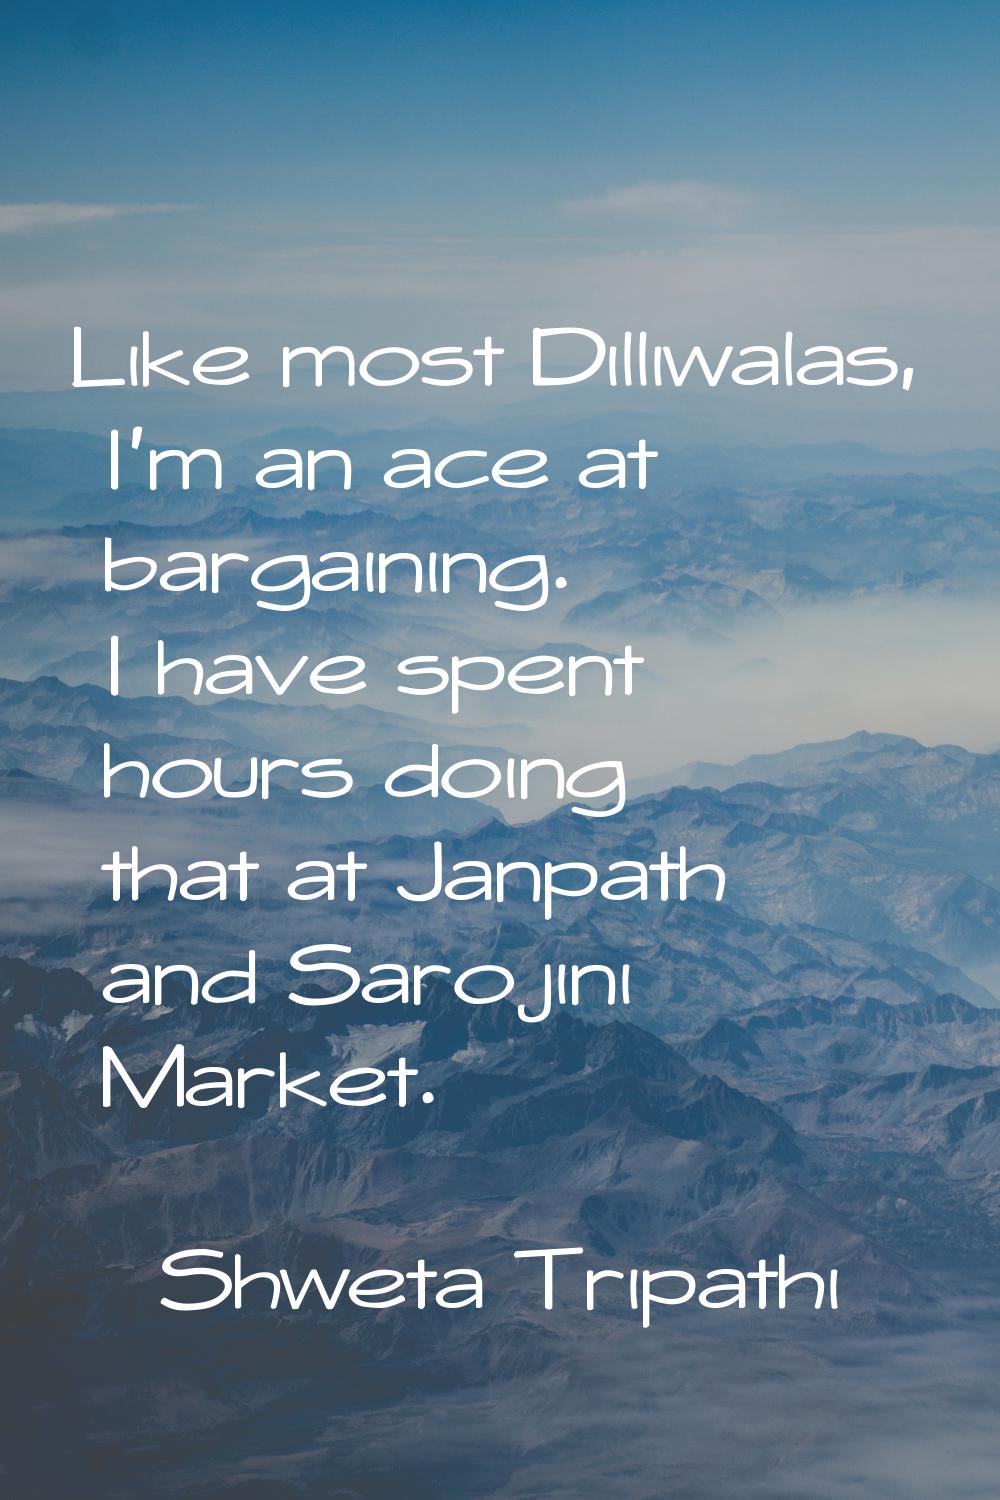 Like most Dilliwalas, I'm an ace at bargaining. I have spent hours doing that at Janpath and Saroji